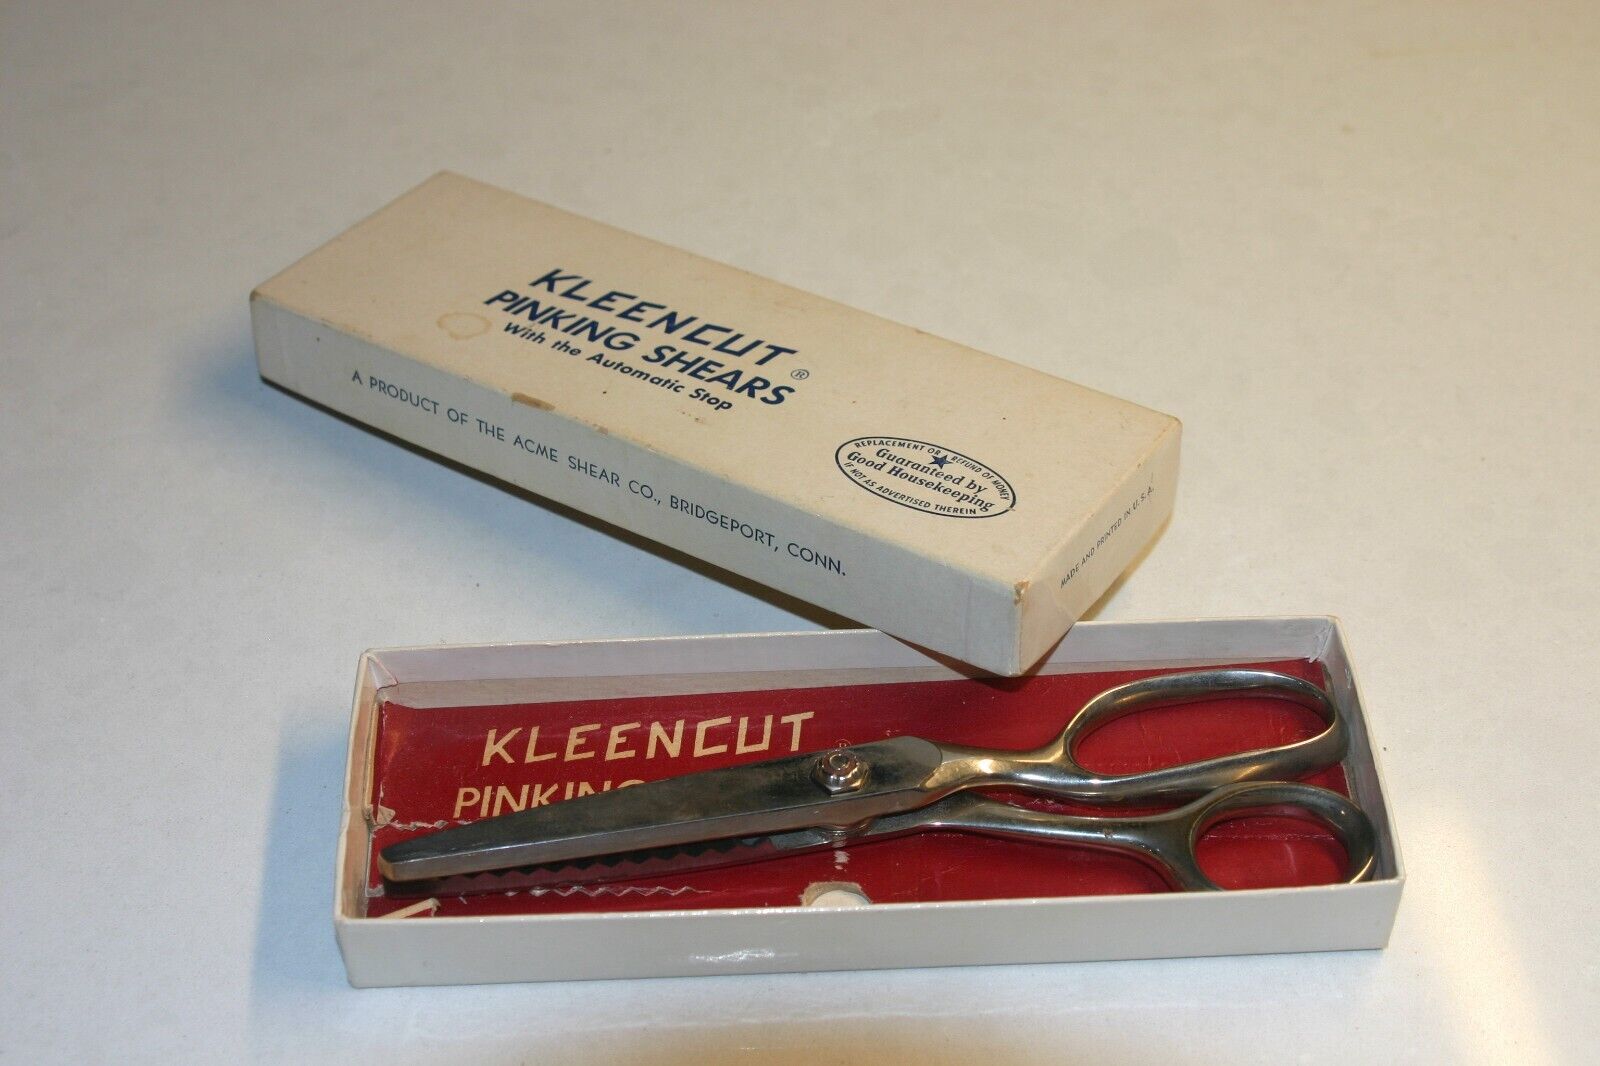 Vintage Kleencut Pinking Shears Fabric Scissors with Automatic Stop Original Box